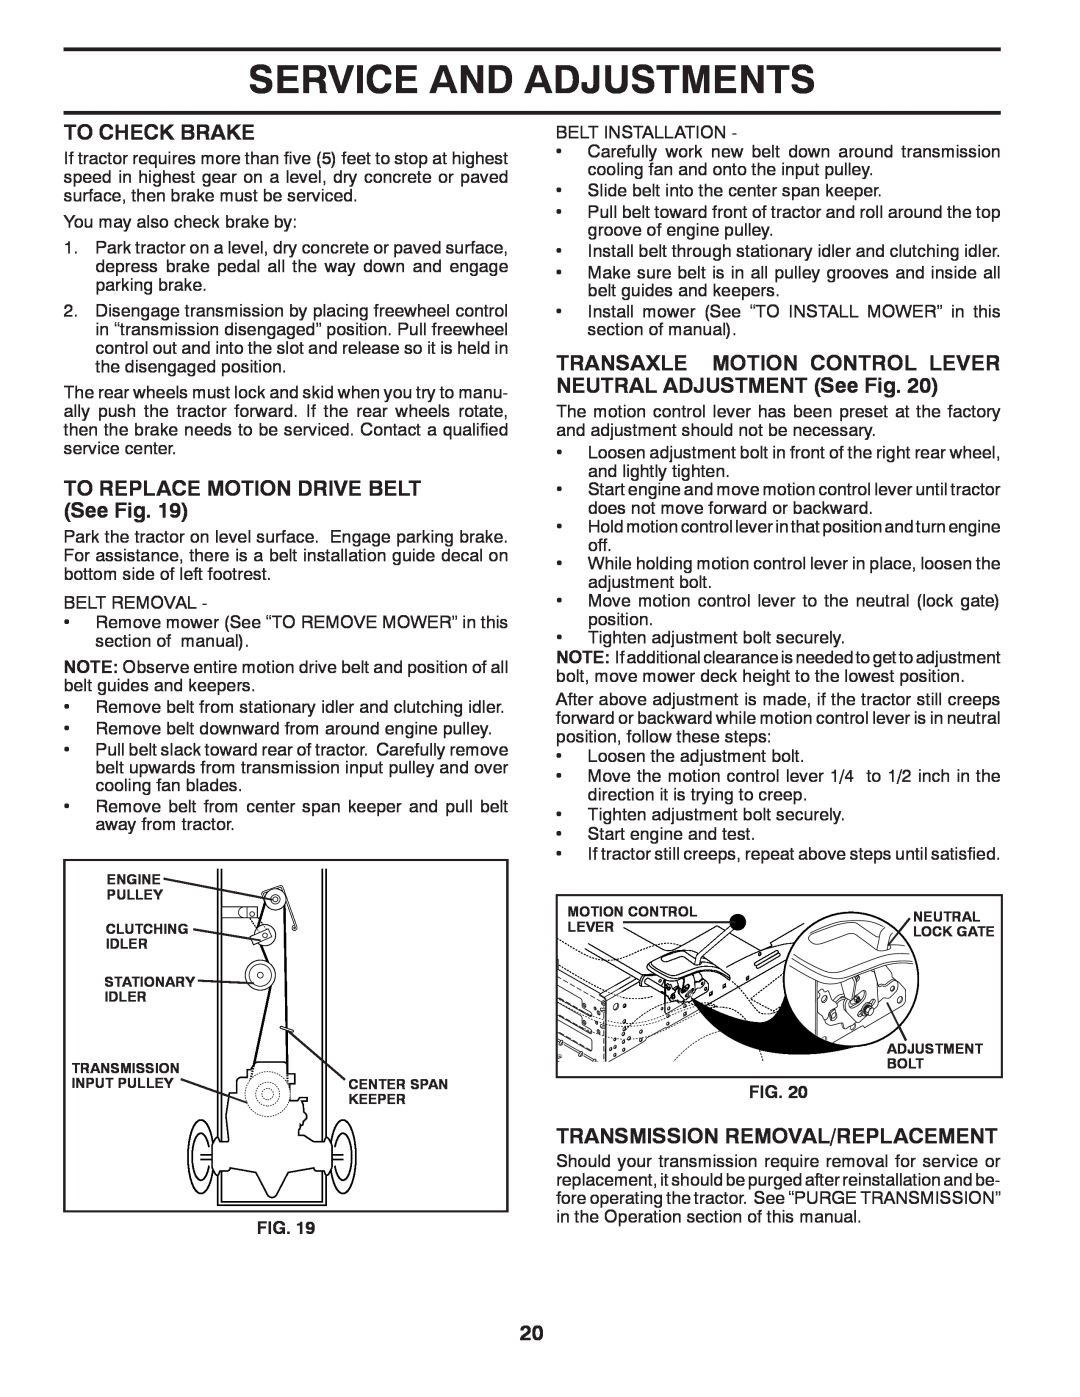 Poulan PO175H42LT manual To Check Brake, TO REPLACE MOTION DRIVE BELT See Fig, Transmission Removal/Replacement 